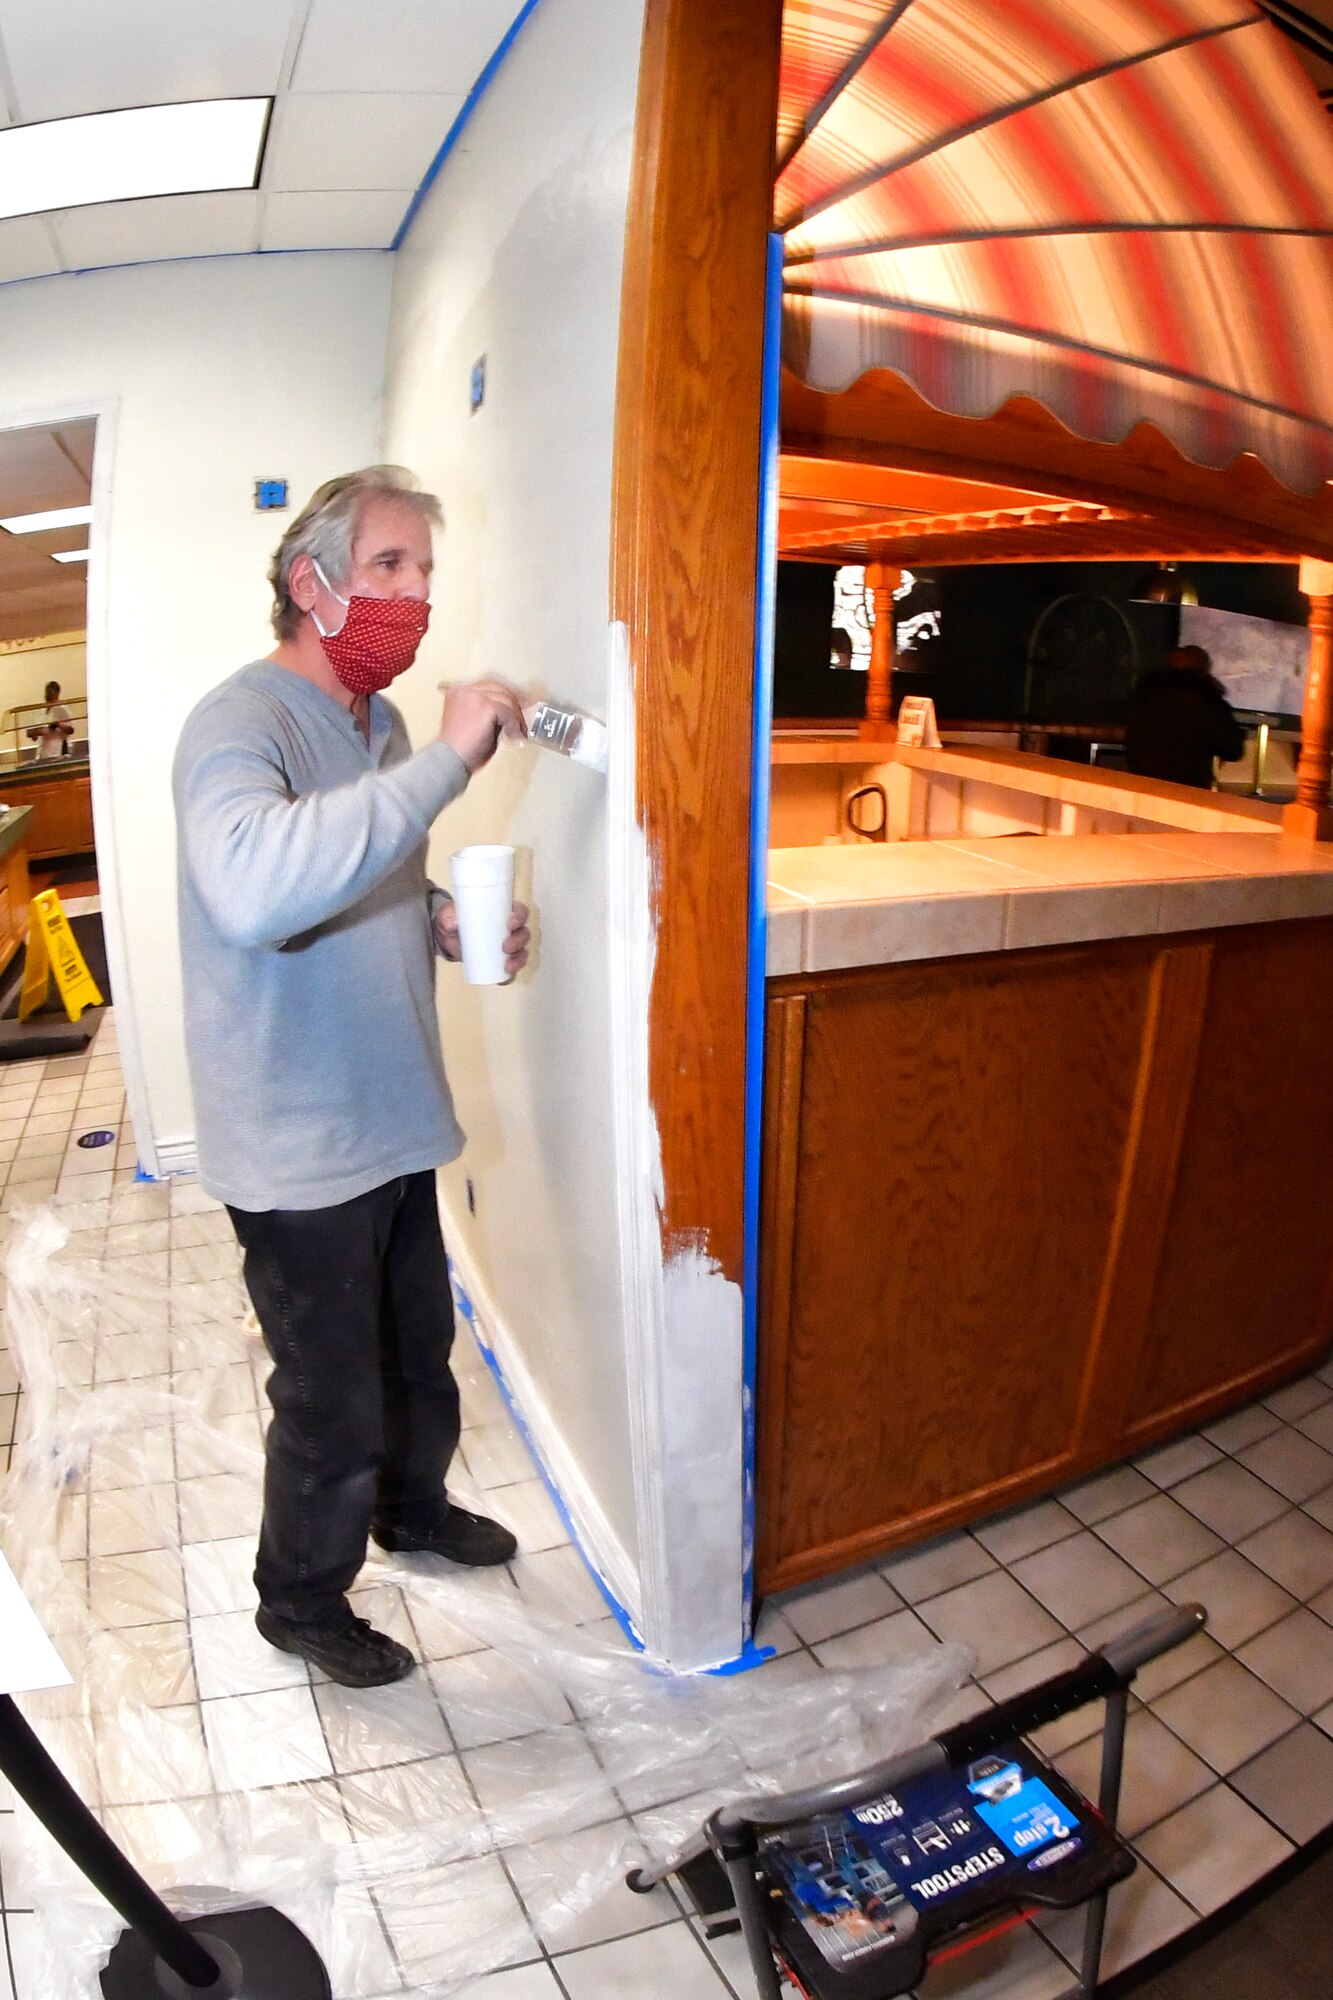 Eric Smith, 75th Force Support Squadron food service specialist, paints the interior of a dining facility Oct. 27, 2020, during a self-help renovation project on Hill Air Force Base, Utah. The DFAC facelift work is being accomplished by food service staff and many volunteer Airman from various squadrons across the base. (U.S. Air Force photo by Todd Cromar)